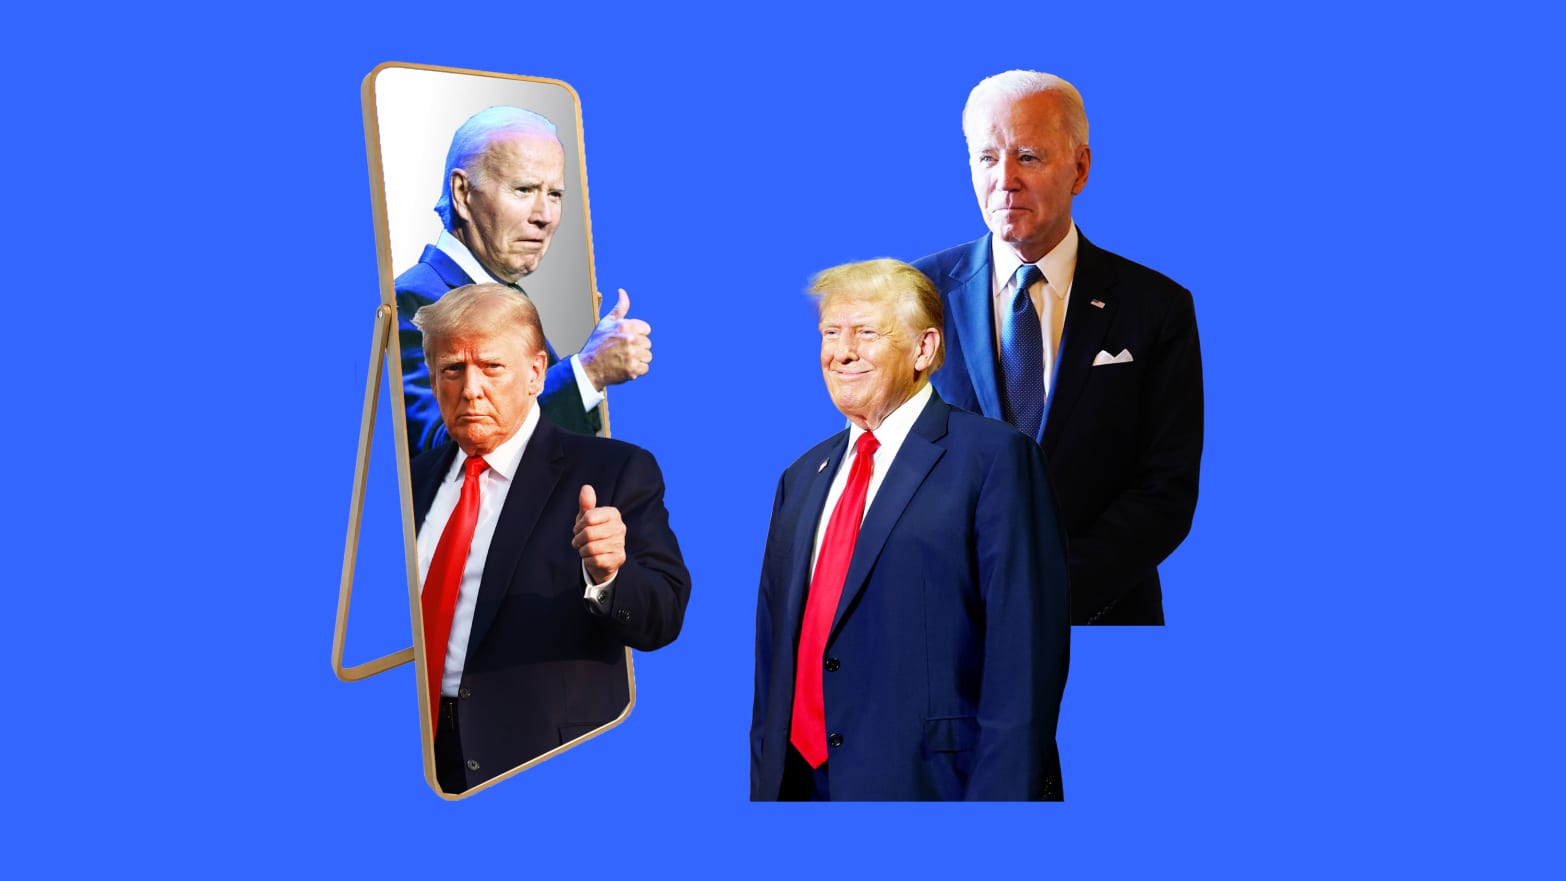 A photo illustration of Donald Trump and Joe Biden looking in a mirror